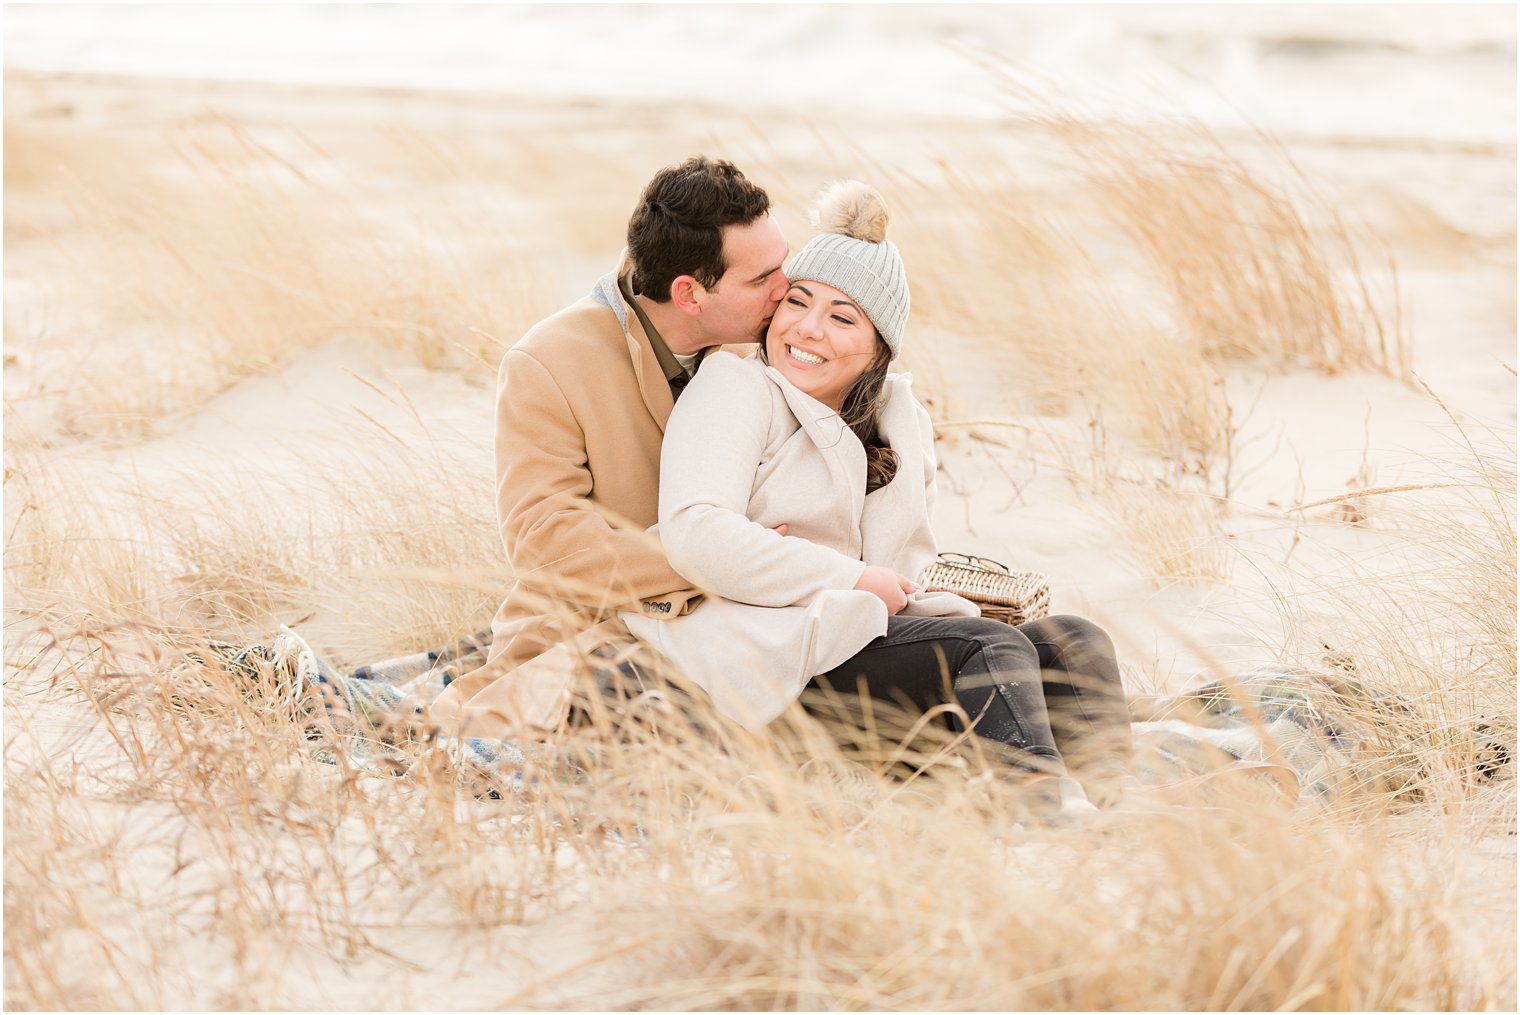 Engaged couple sitting on a plaid blanket on the beach during winter